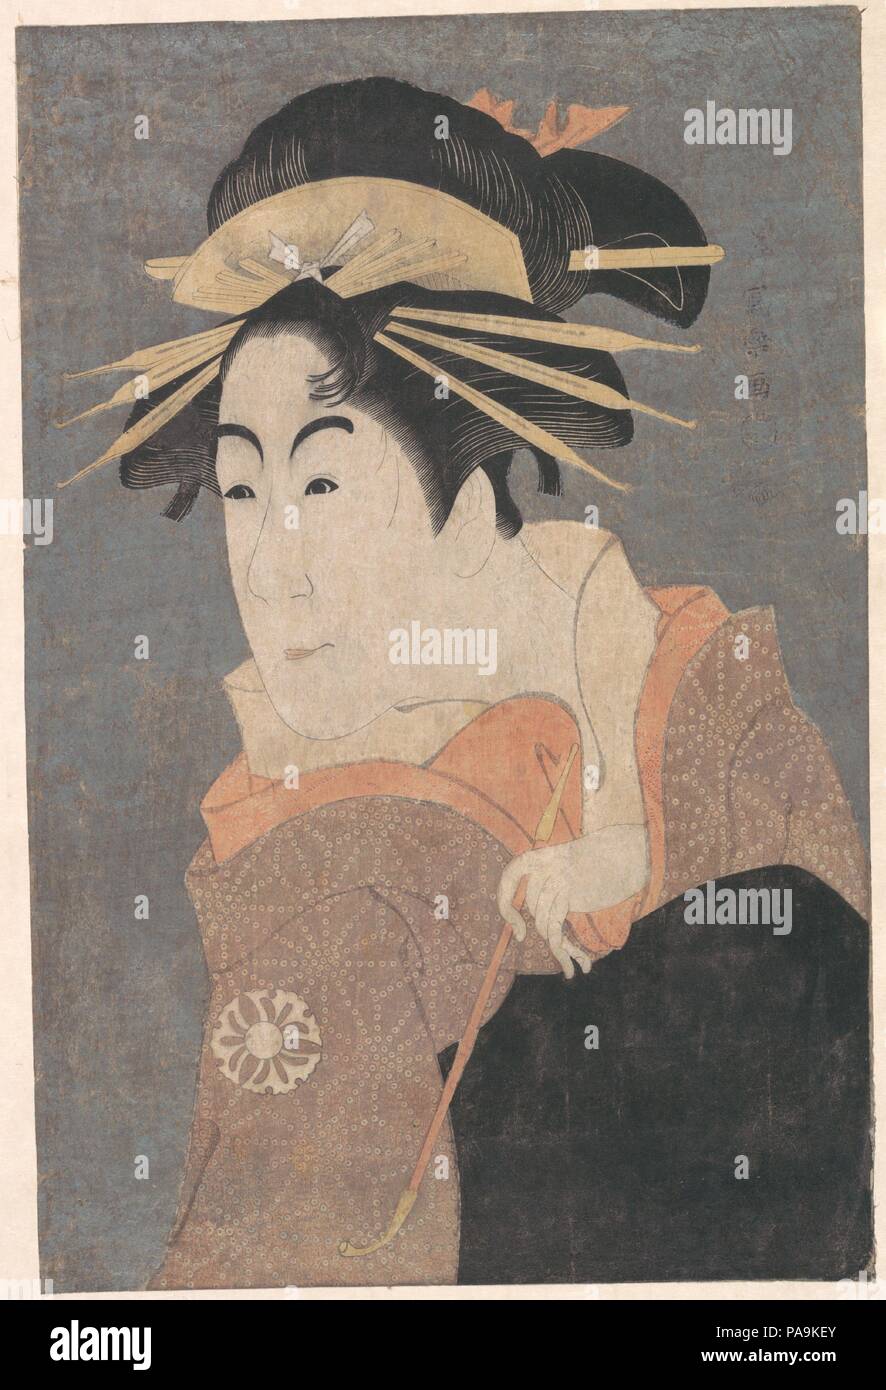 Matsumoto Yonesaburo as Kewaizaka no Shosho in the Play 'Katakiuchi Noriyaibanashi'. Artist: Toshusai Sharaku (Japanese, active 1794-95). Culture: Japan. Dimensions: 15 1/8 x 9 7/8 in. (38.4 x 25.1 cm). Date: ca. 1794.  This portrait features another actor impersonating a female character, in this case an oiran, or high-ranking courtesan, in the Yoshiwara pleasure quarters of Edo.  But there is another layer to this act: the character portrayed, Kewaizaka no Shosho, is here pretending to be another character in the play, Shinobu.  Kewaizaka affects the mannerisms of this haughty temptress with Stock Photo